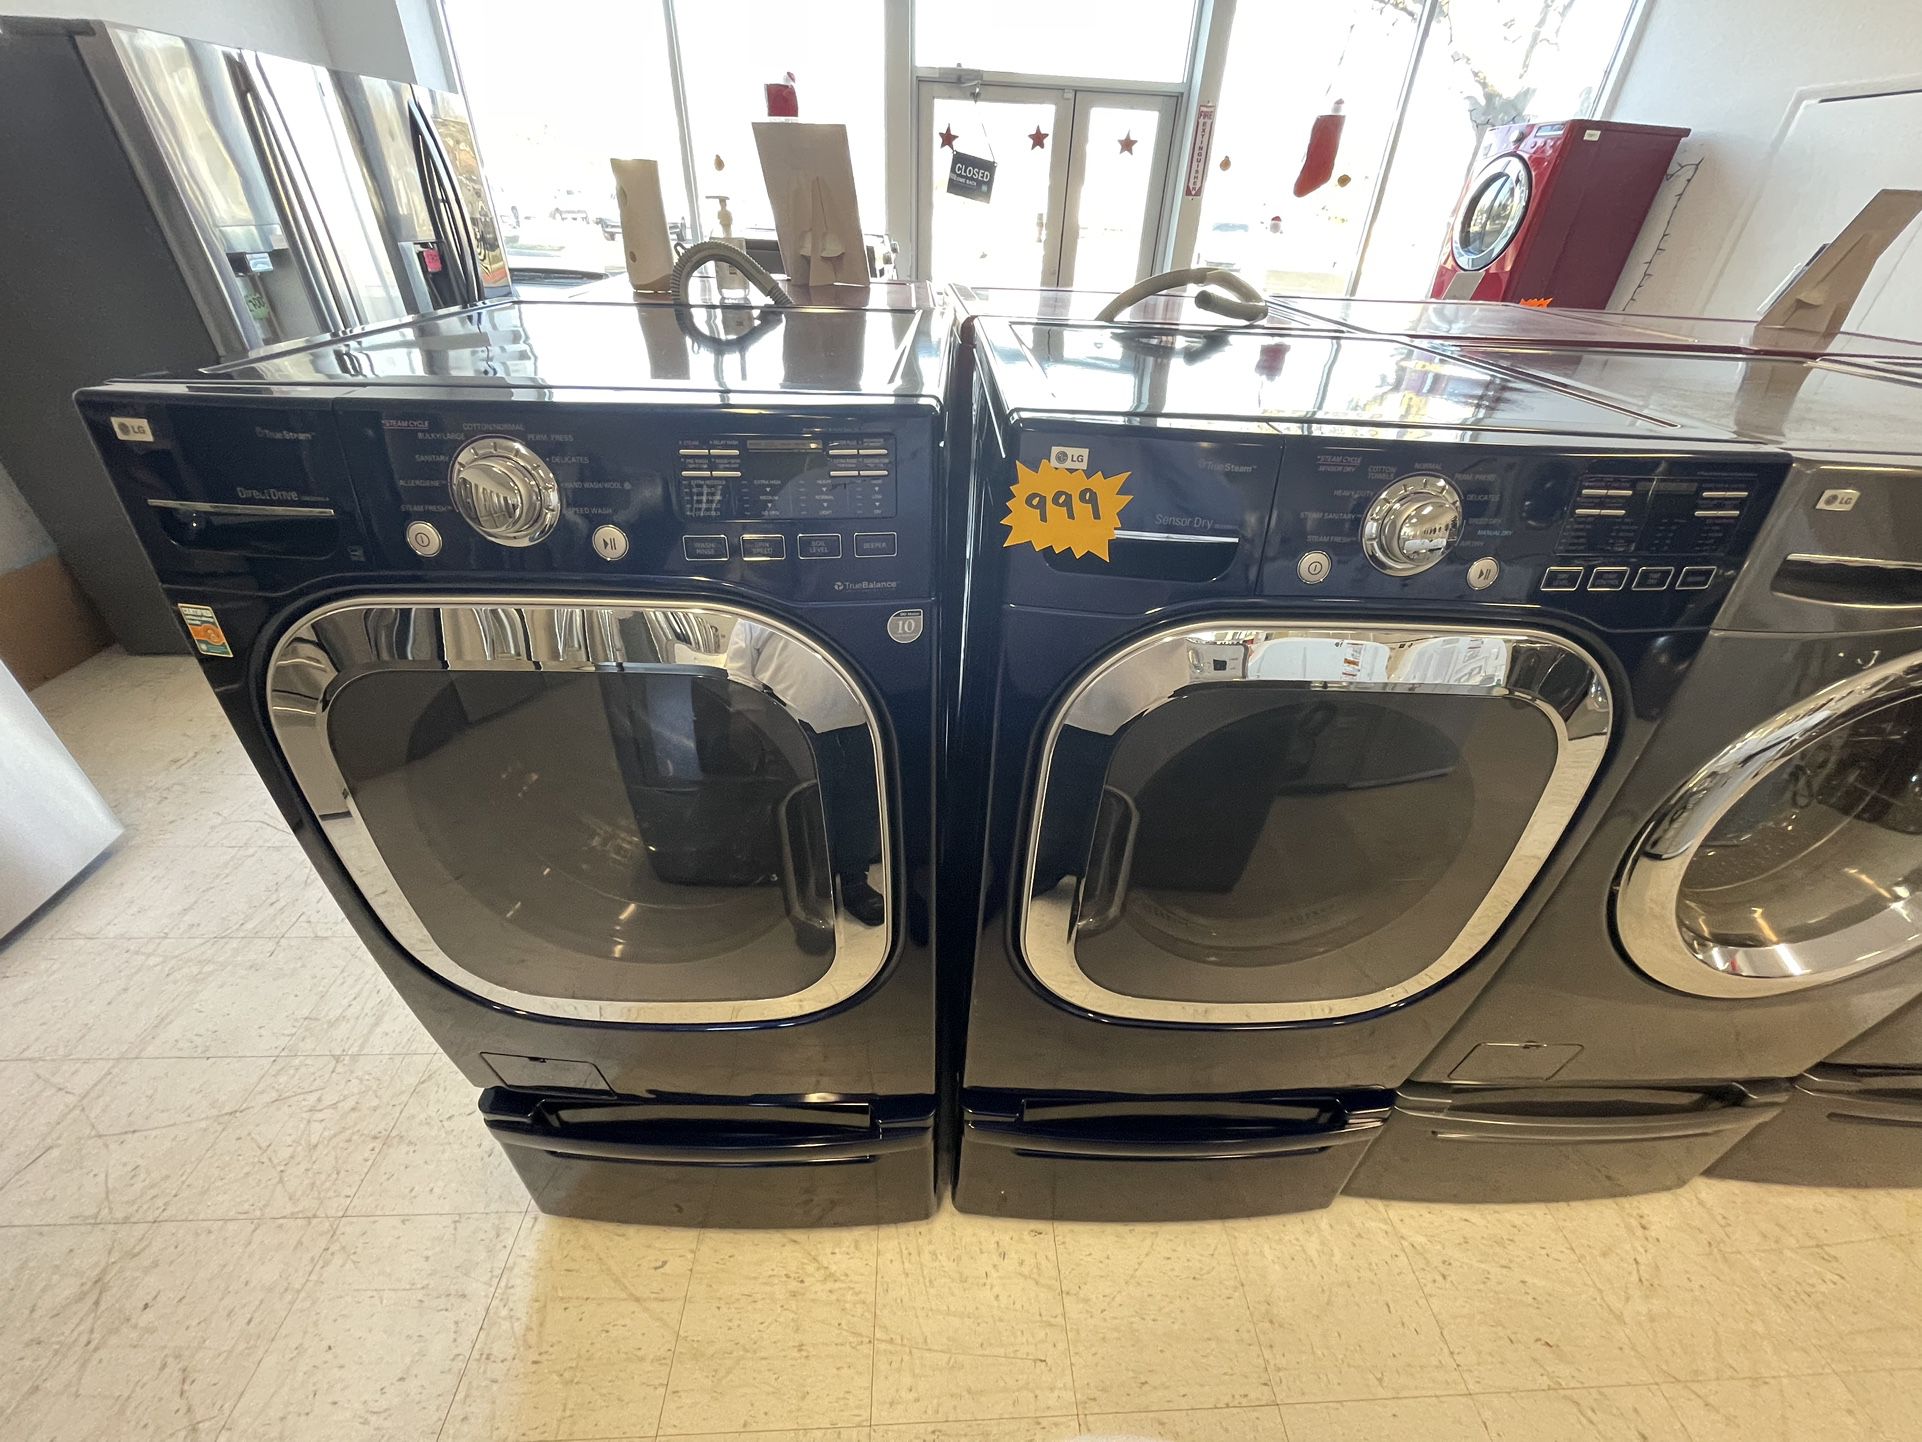 LG Front Load Washer And Electric Dryer Set With 90days Warranty 